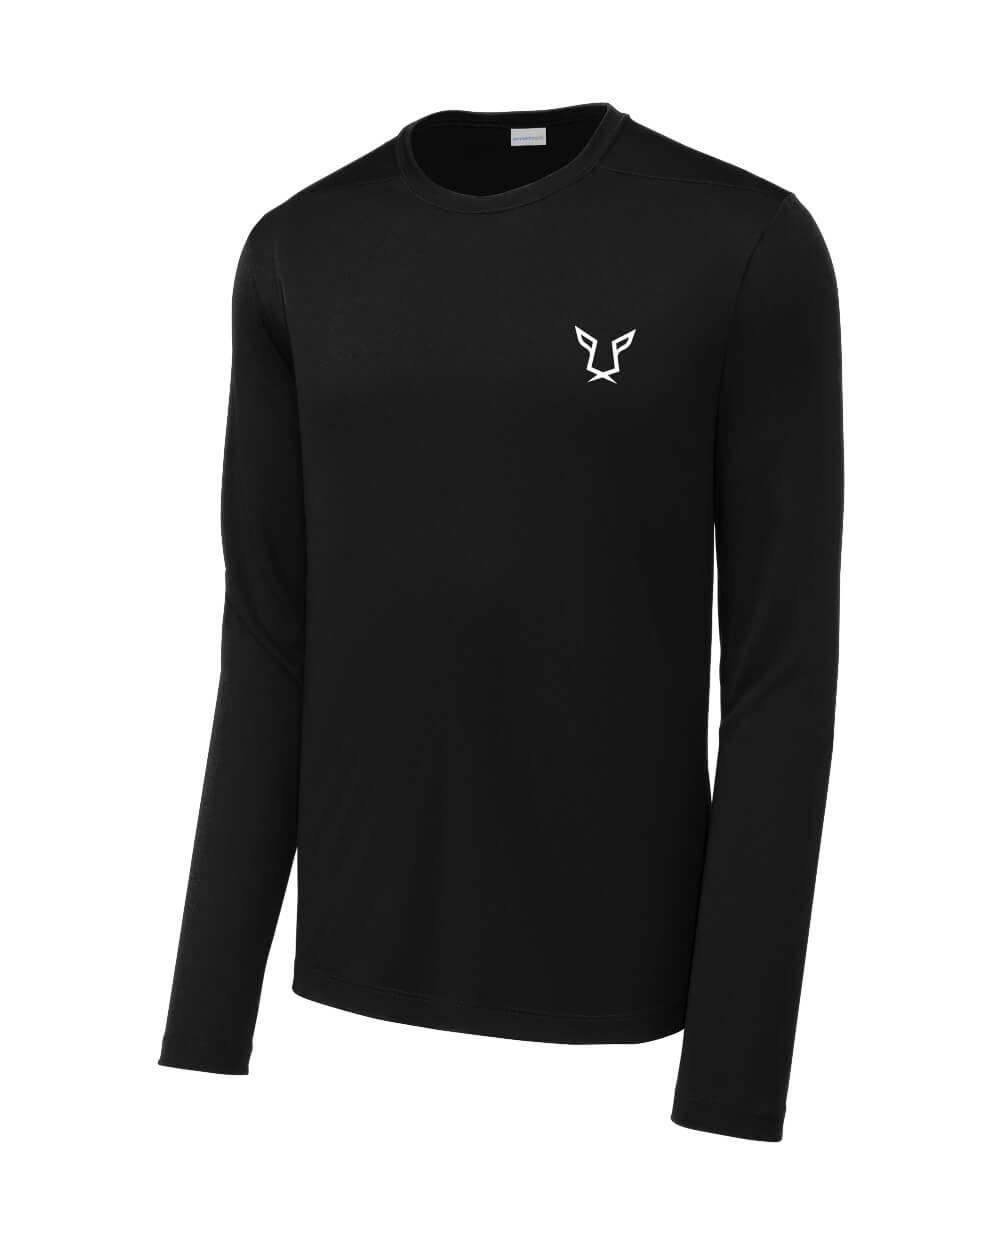 Men's Black Evolution Performance Long Sleeve Tee by Odisi Apparel